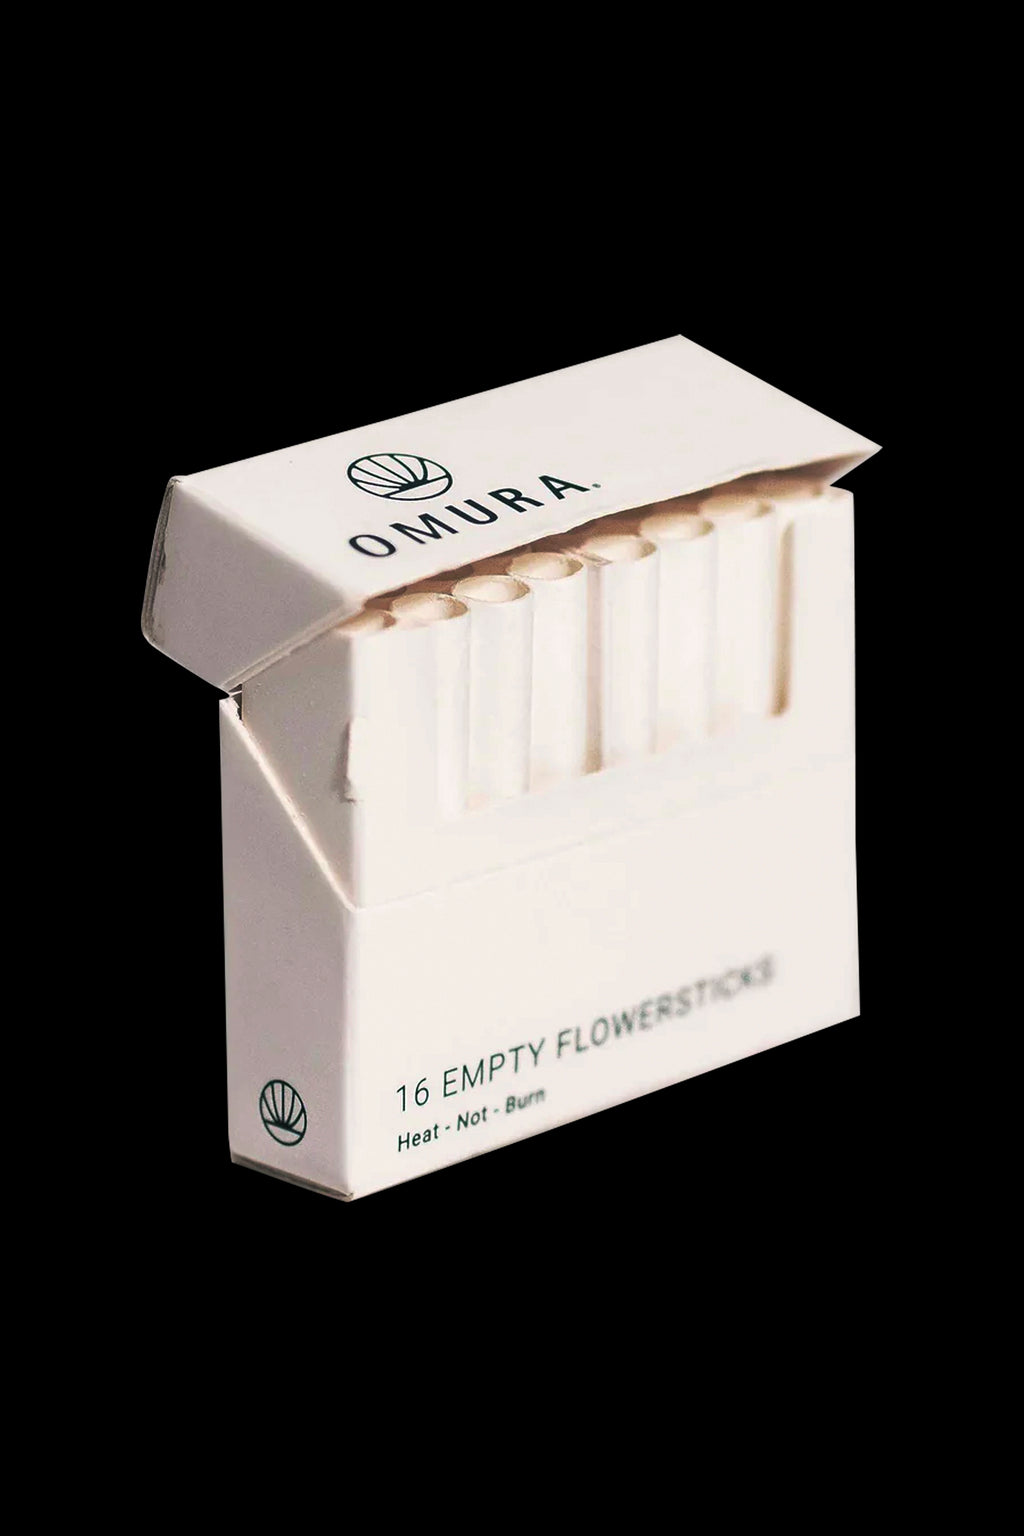 Omura Flower Sticks 12 & 20 pack  Fill With Your Own Herb! – Herbalize  Store